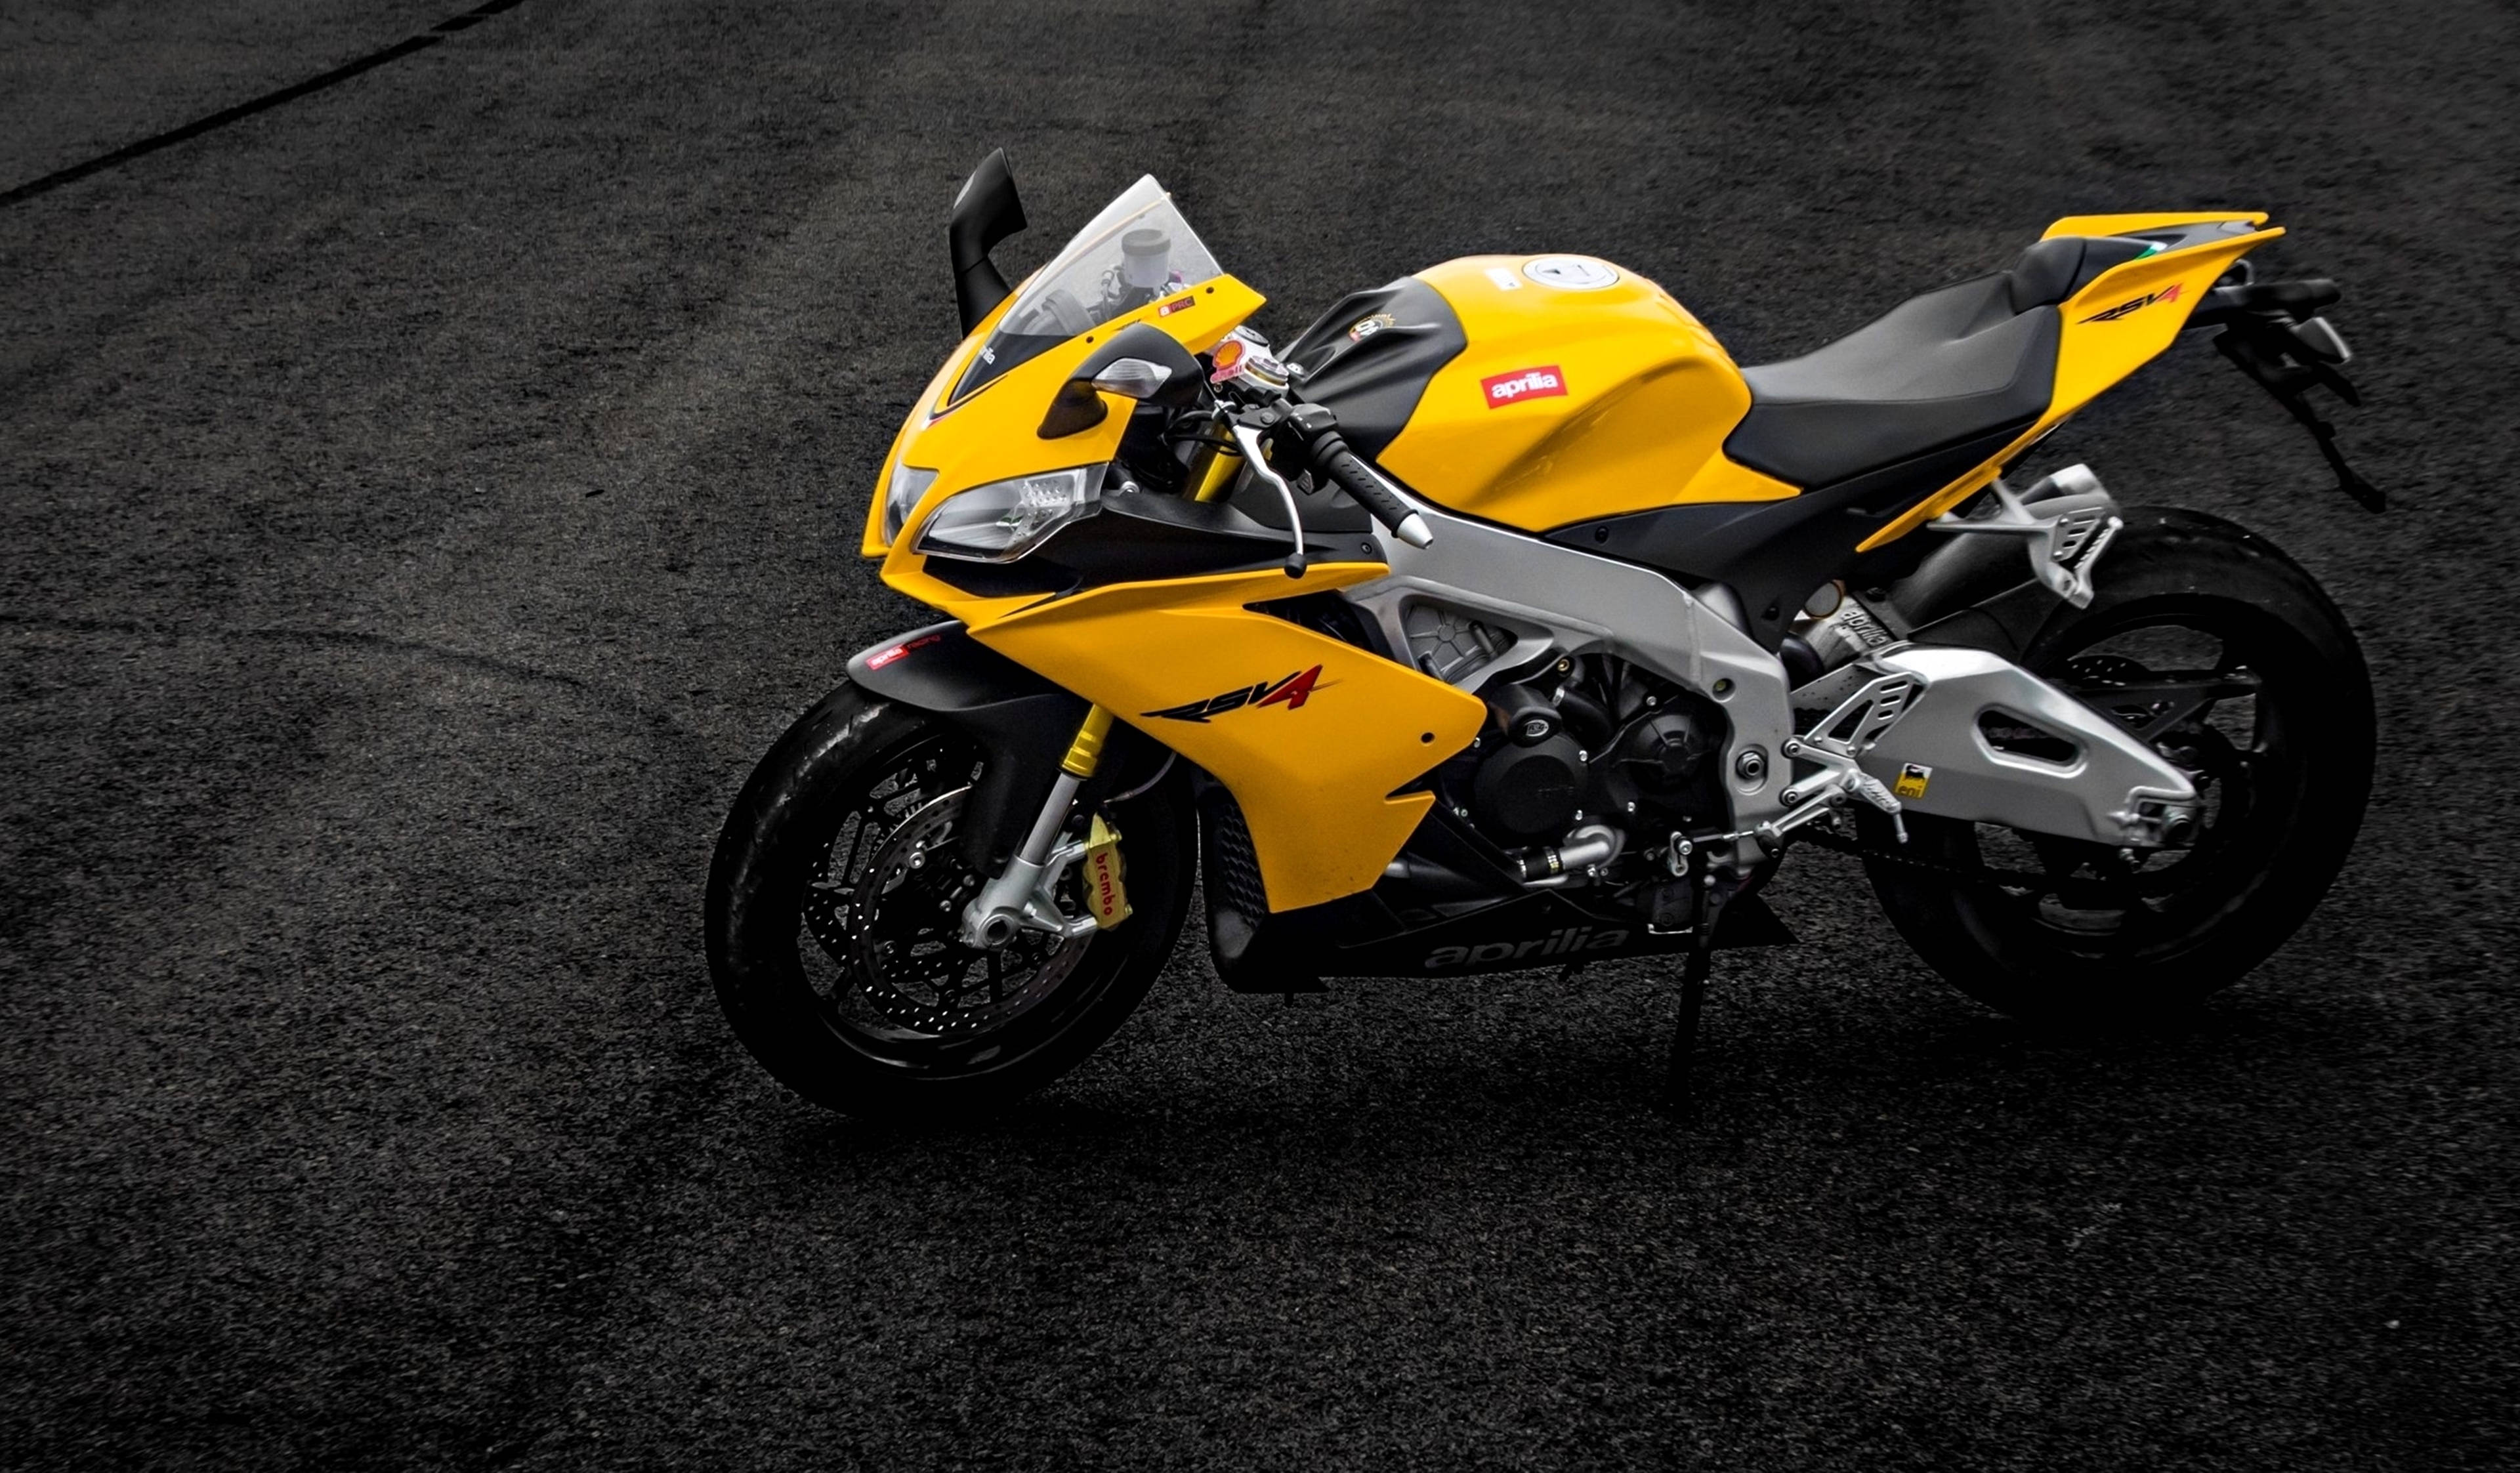 Stunning Black And Yellow Aprilia Motorcycle In 1920x1080 Resolution Wallpaper